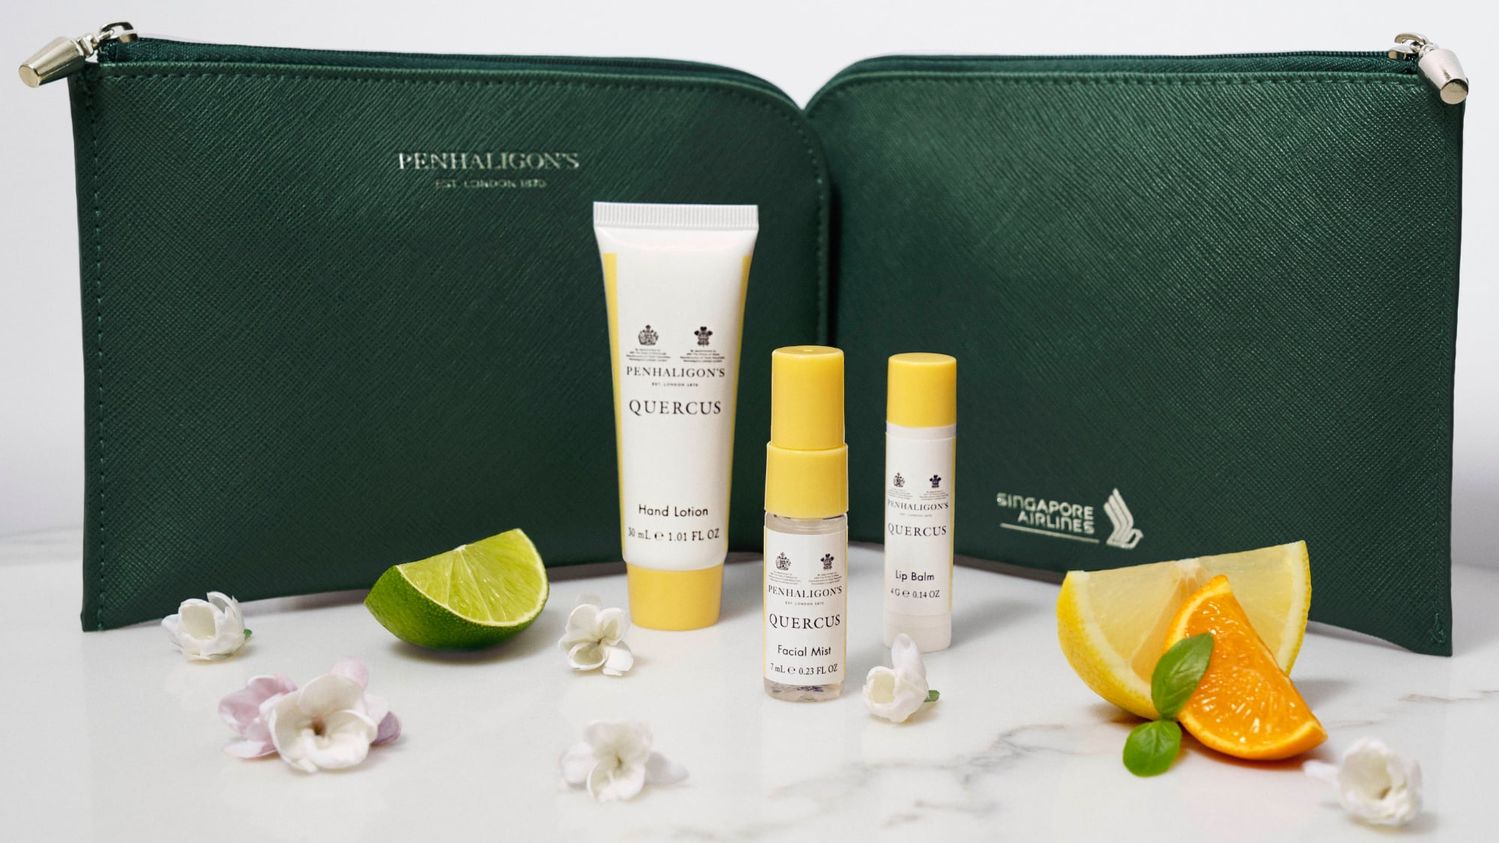 Here is Singapore Airlines’ longawaited business class amenity kit